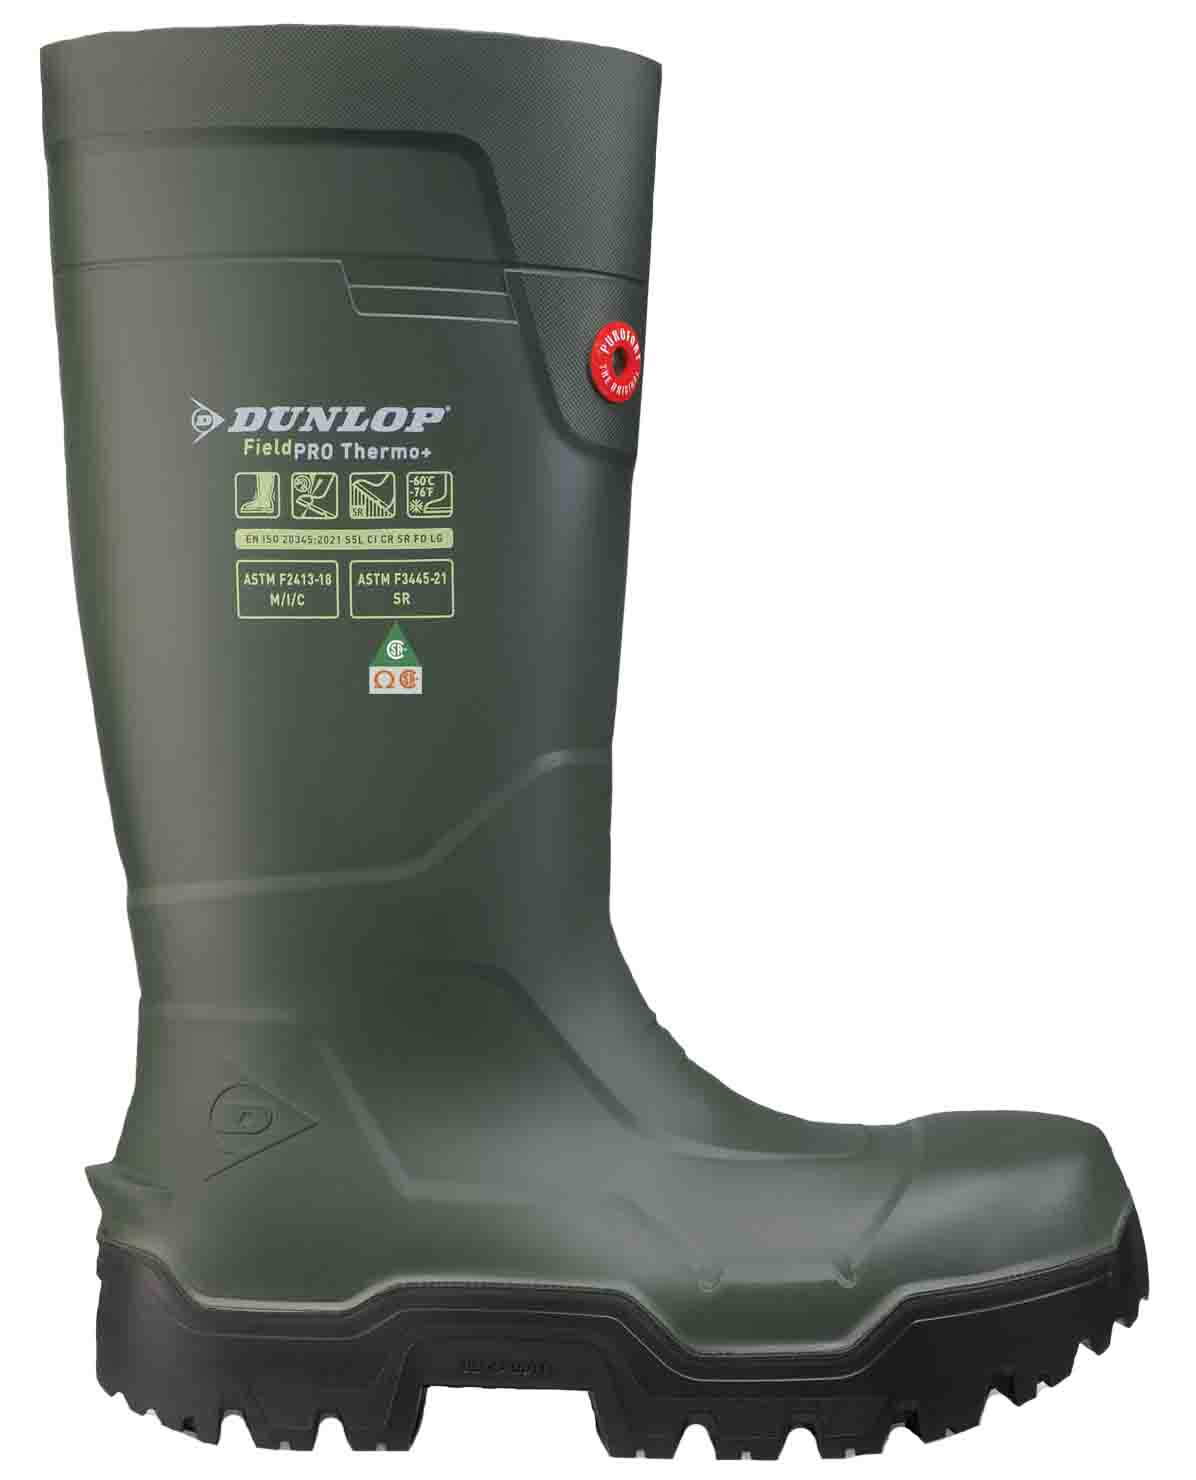 Dunlop® Fieldpro Thermo+ Full Safety - Click Image to Close